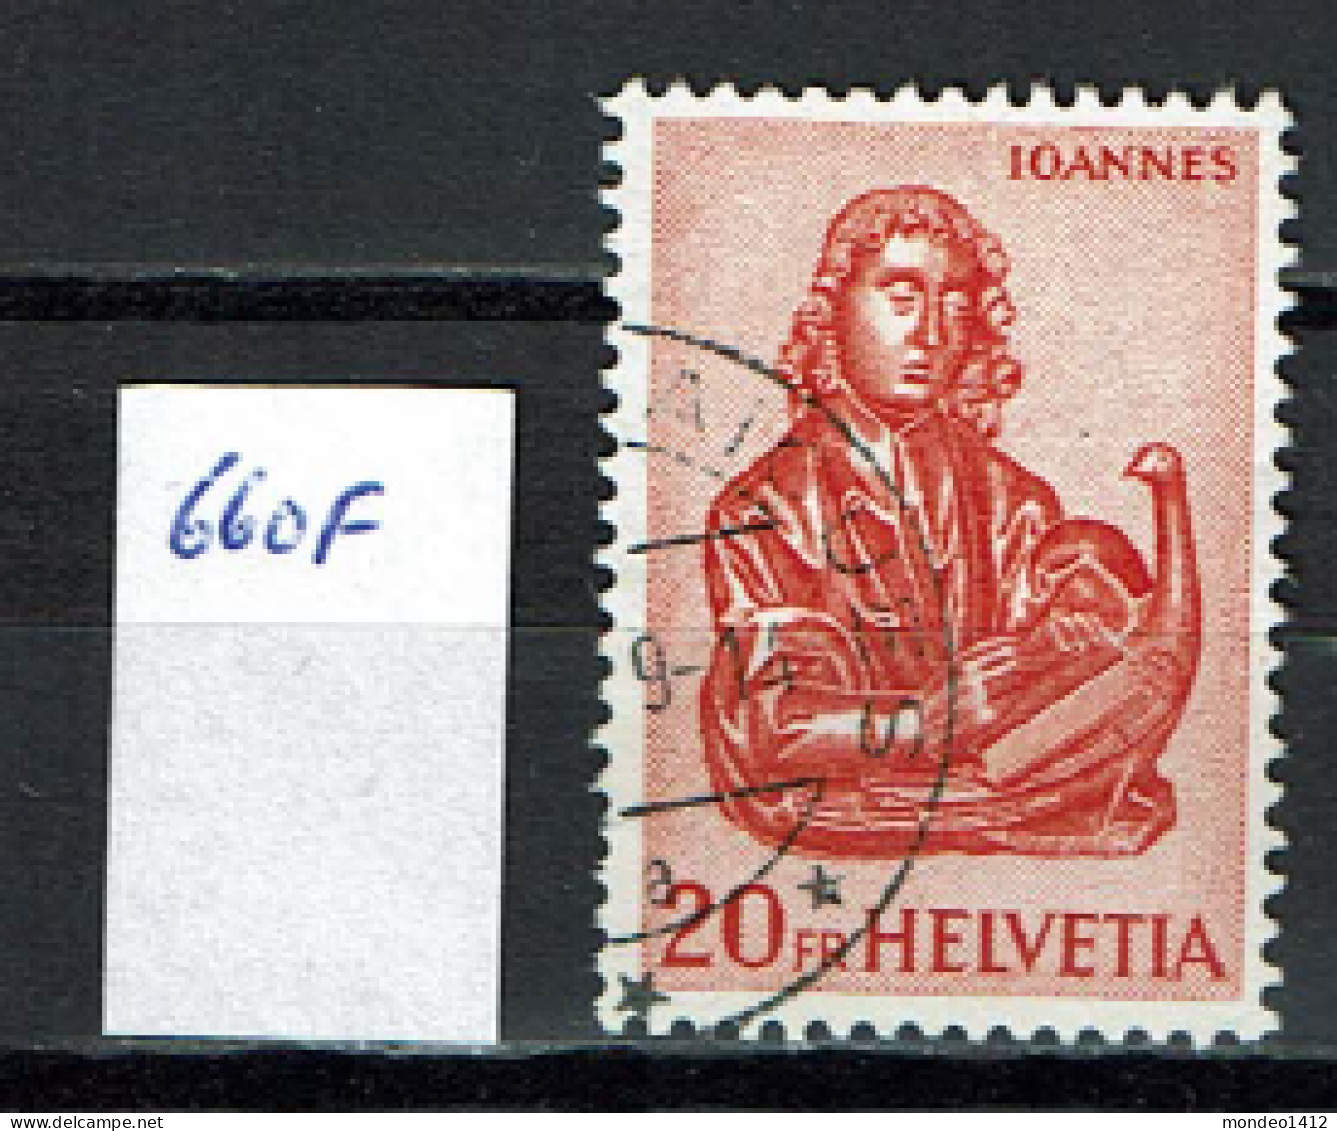 Suisse 1960 - YT 666 F - Oblit. Used - Used Stamps